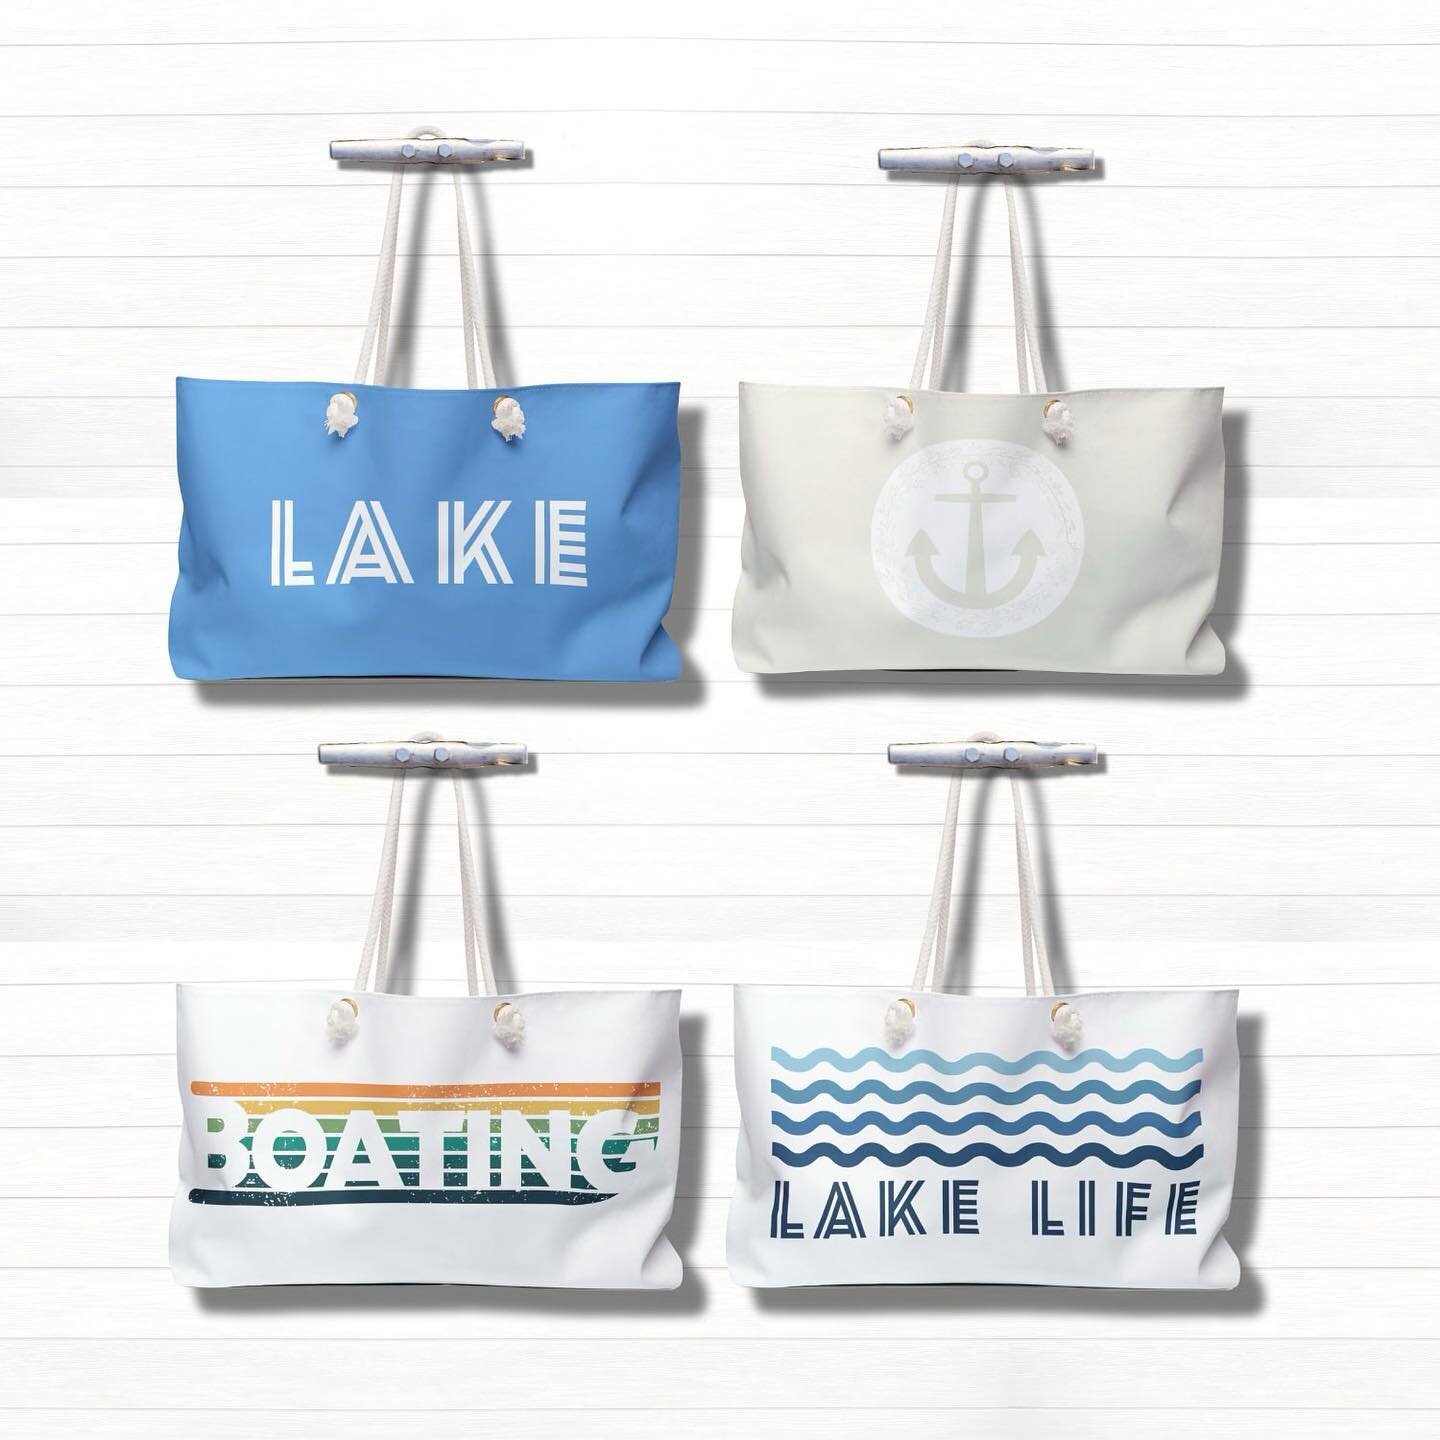 Everyone needs a catch all bag! Check out our new beach bags and more at www.lakelifeshop.com! 🤍

#lakeminnetonka #lakelife #lifeisbetteratthelake #minnesota #lakegear #minneapolis #shoplakelife